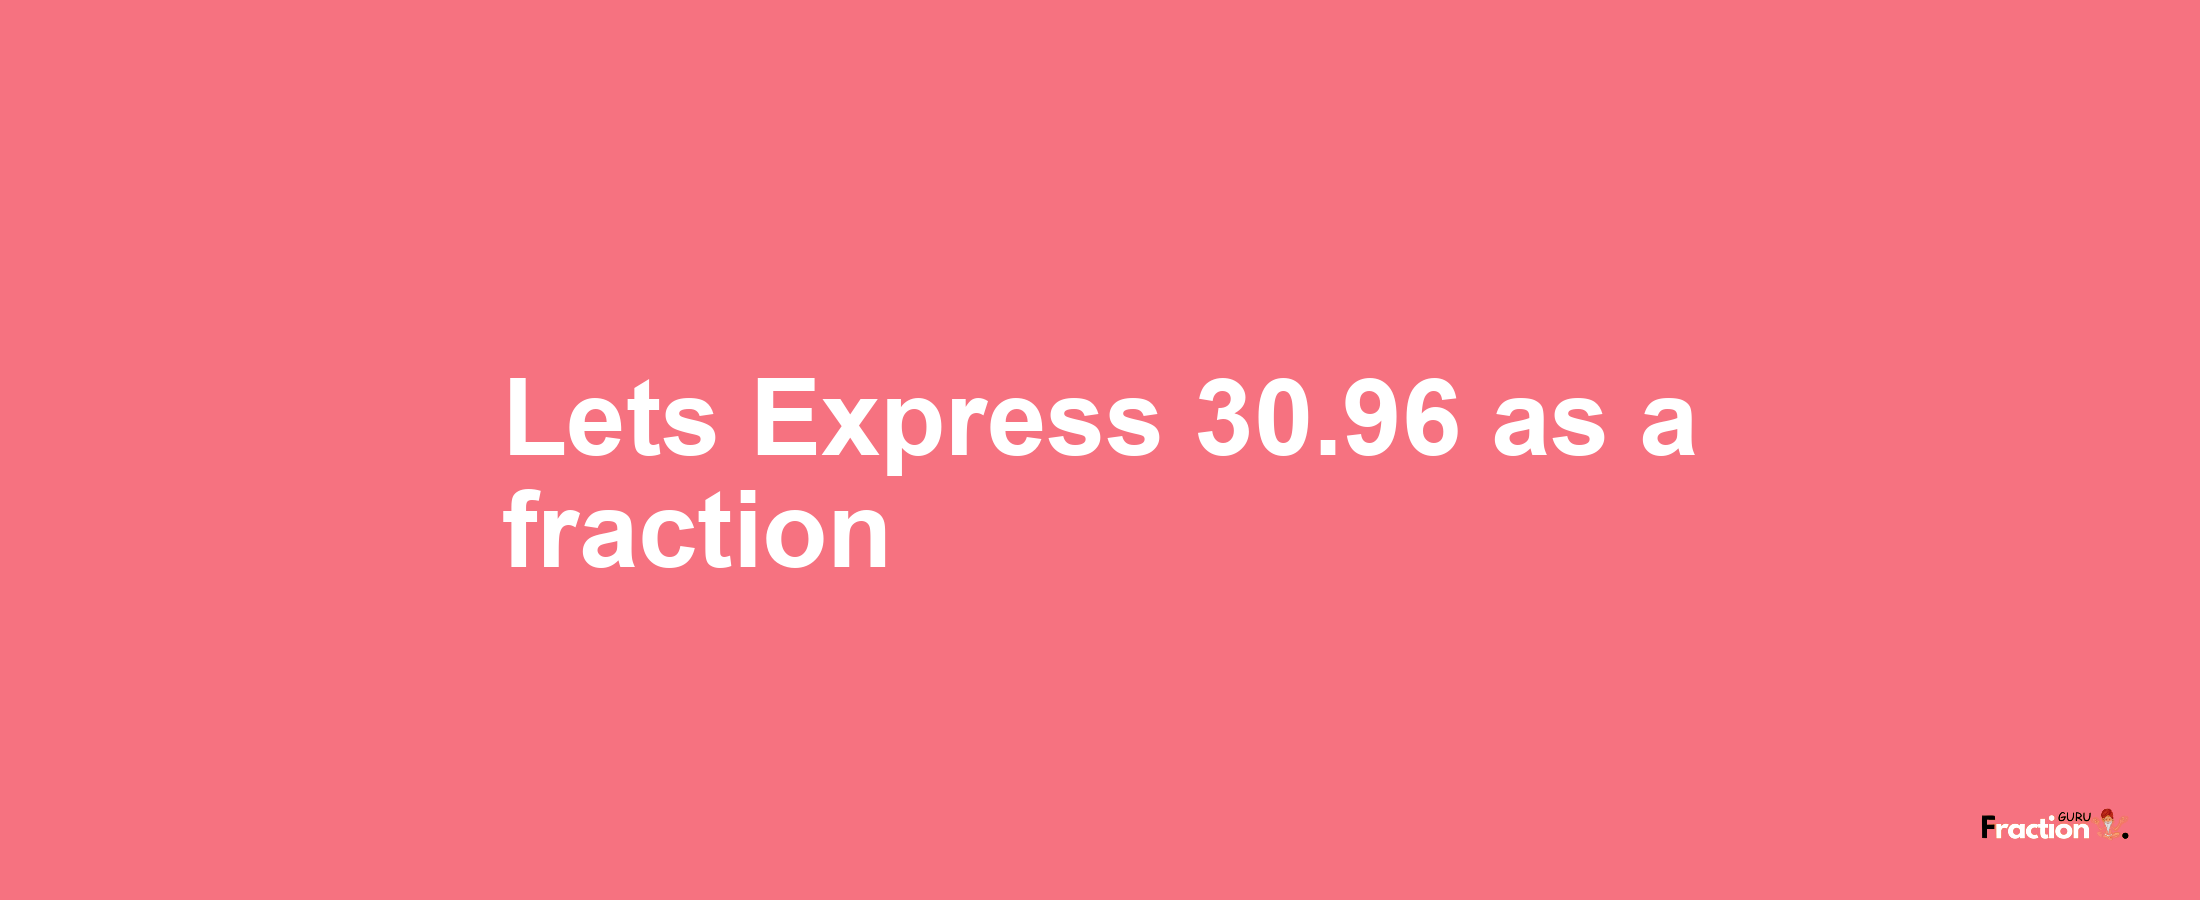 Lets Express 30.96 as afraction